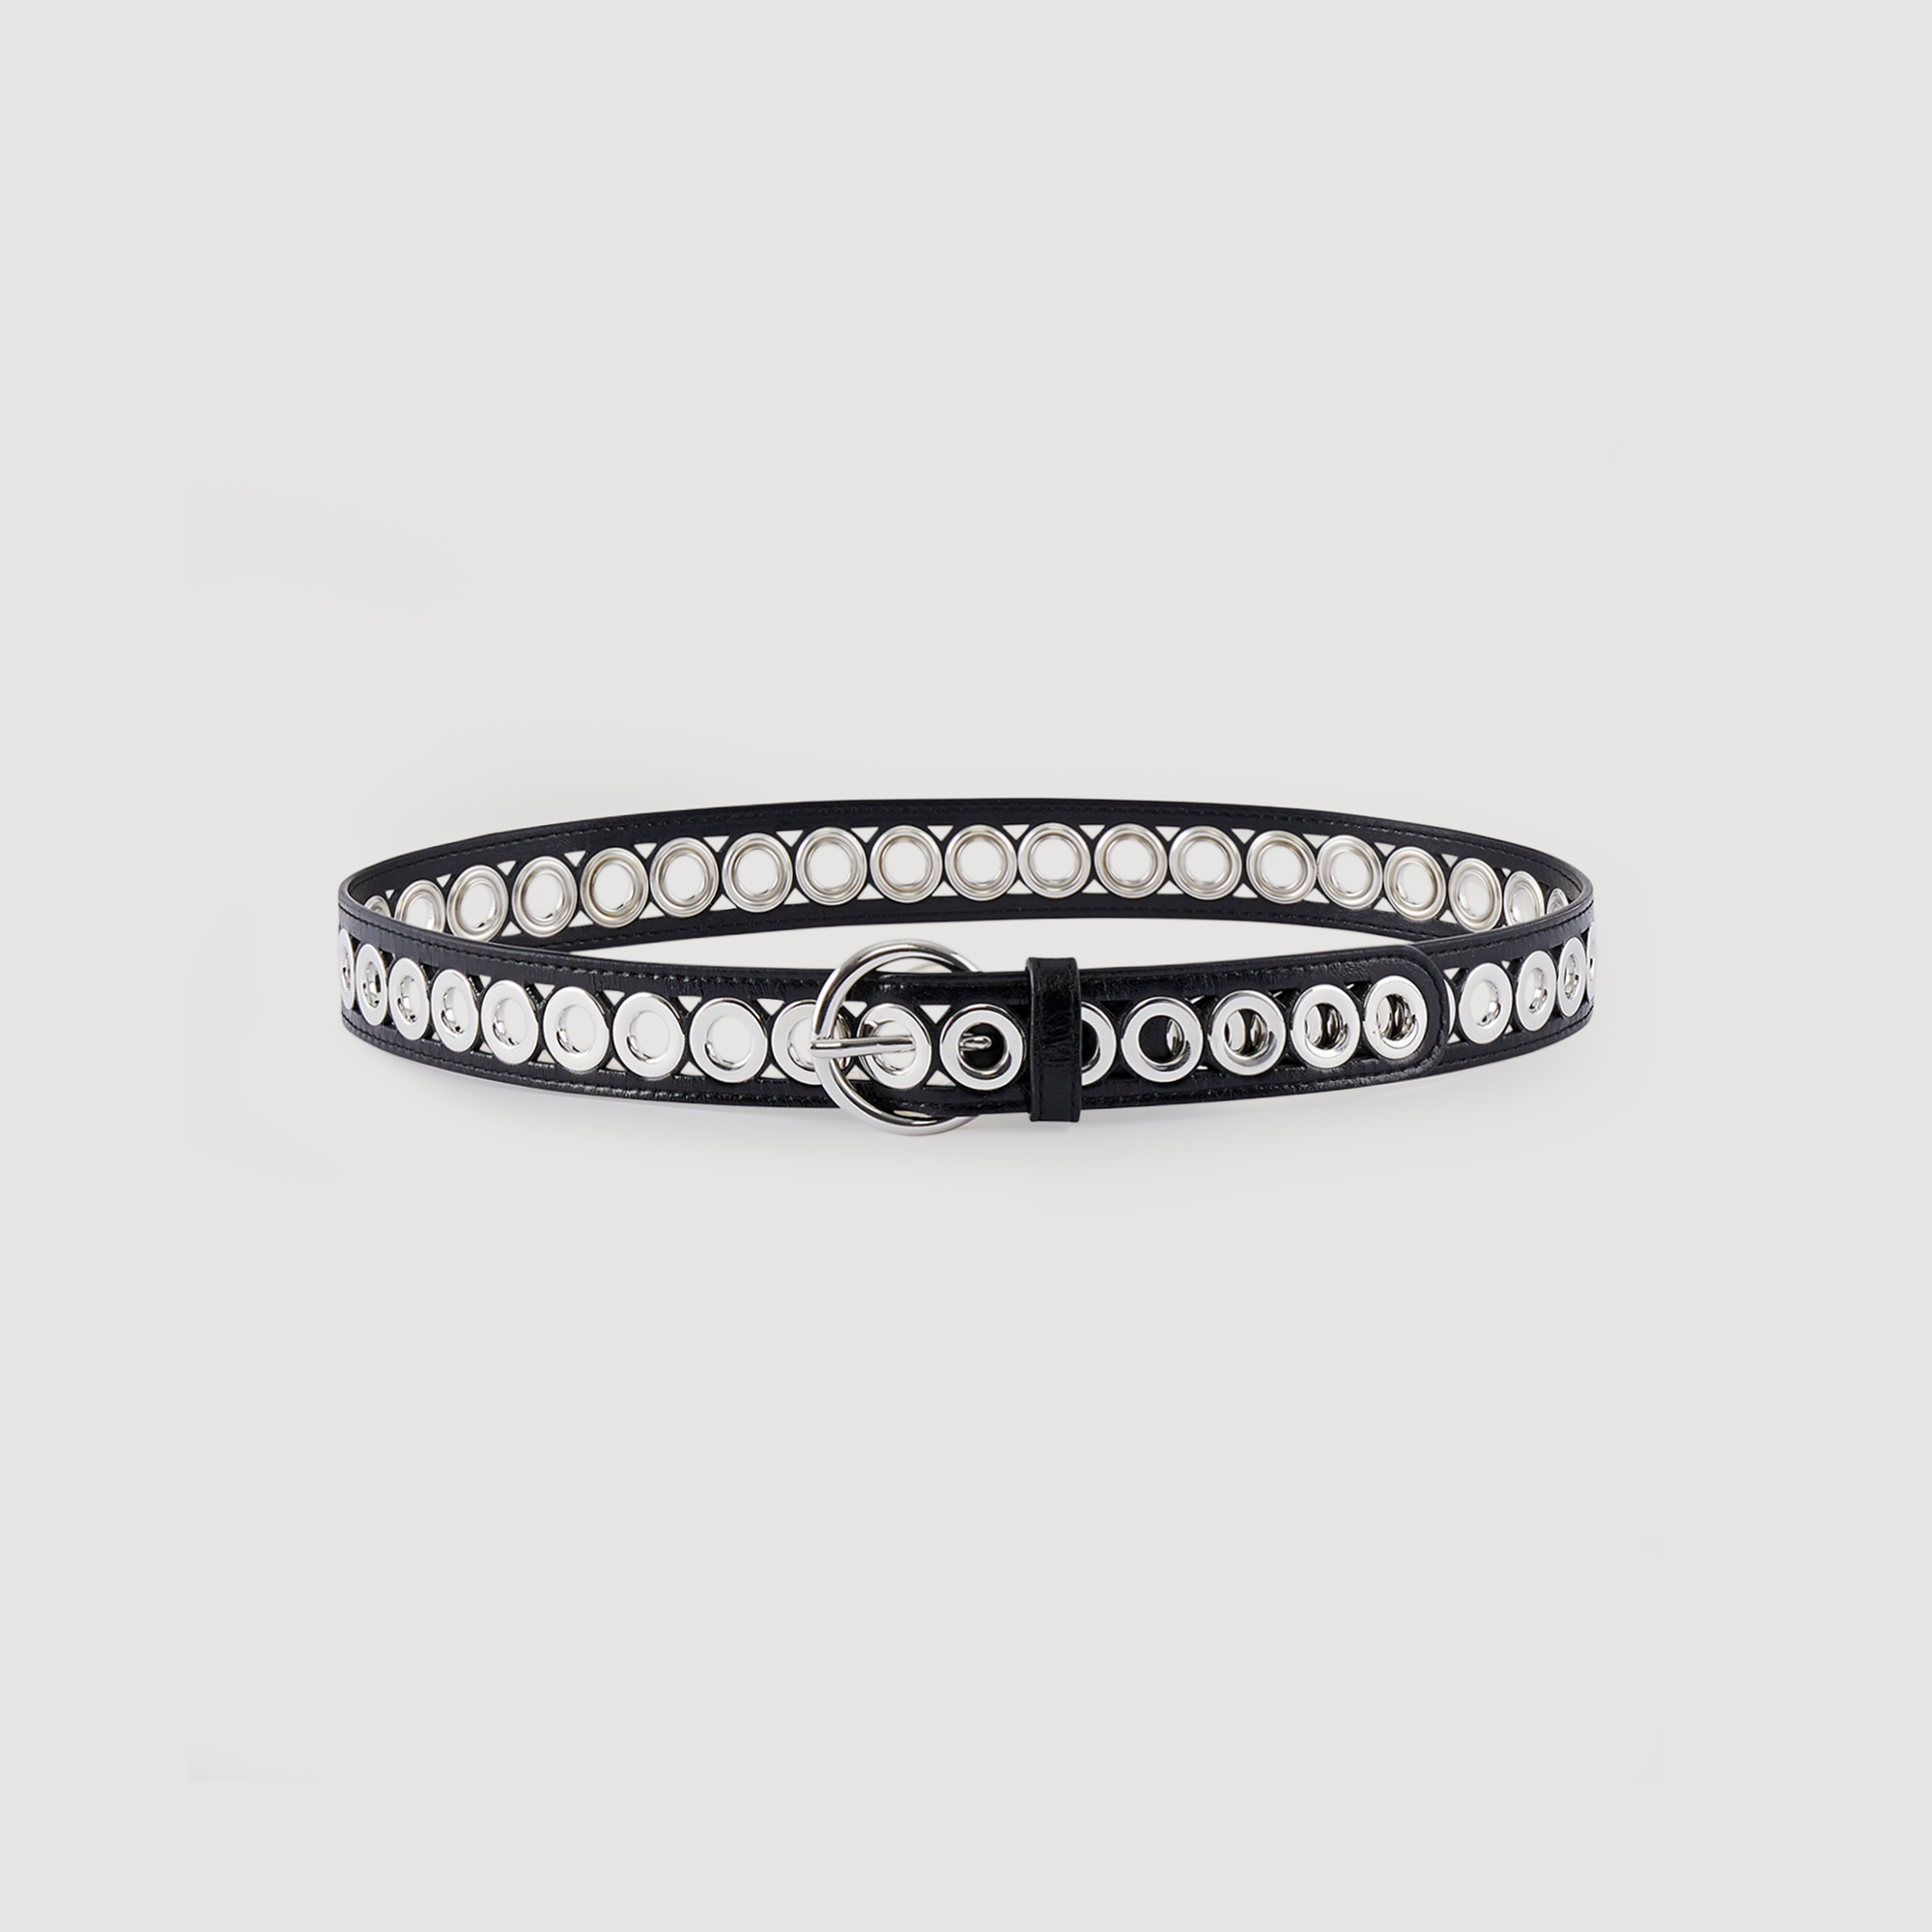 Sandro polyester Leather belt with an adjustable buckle, embellished with metal eyelets